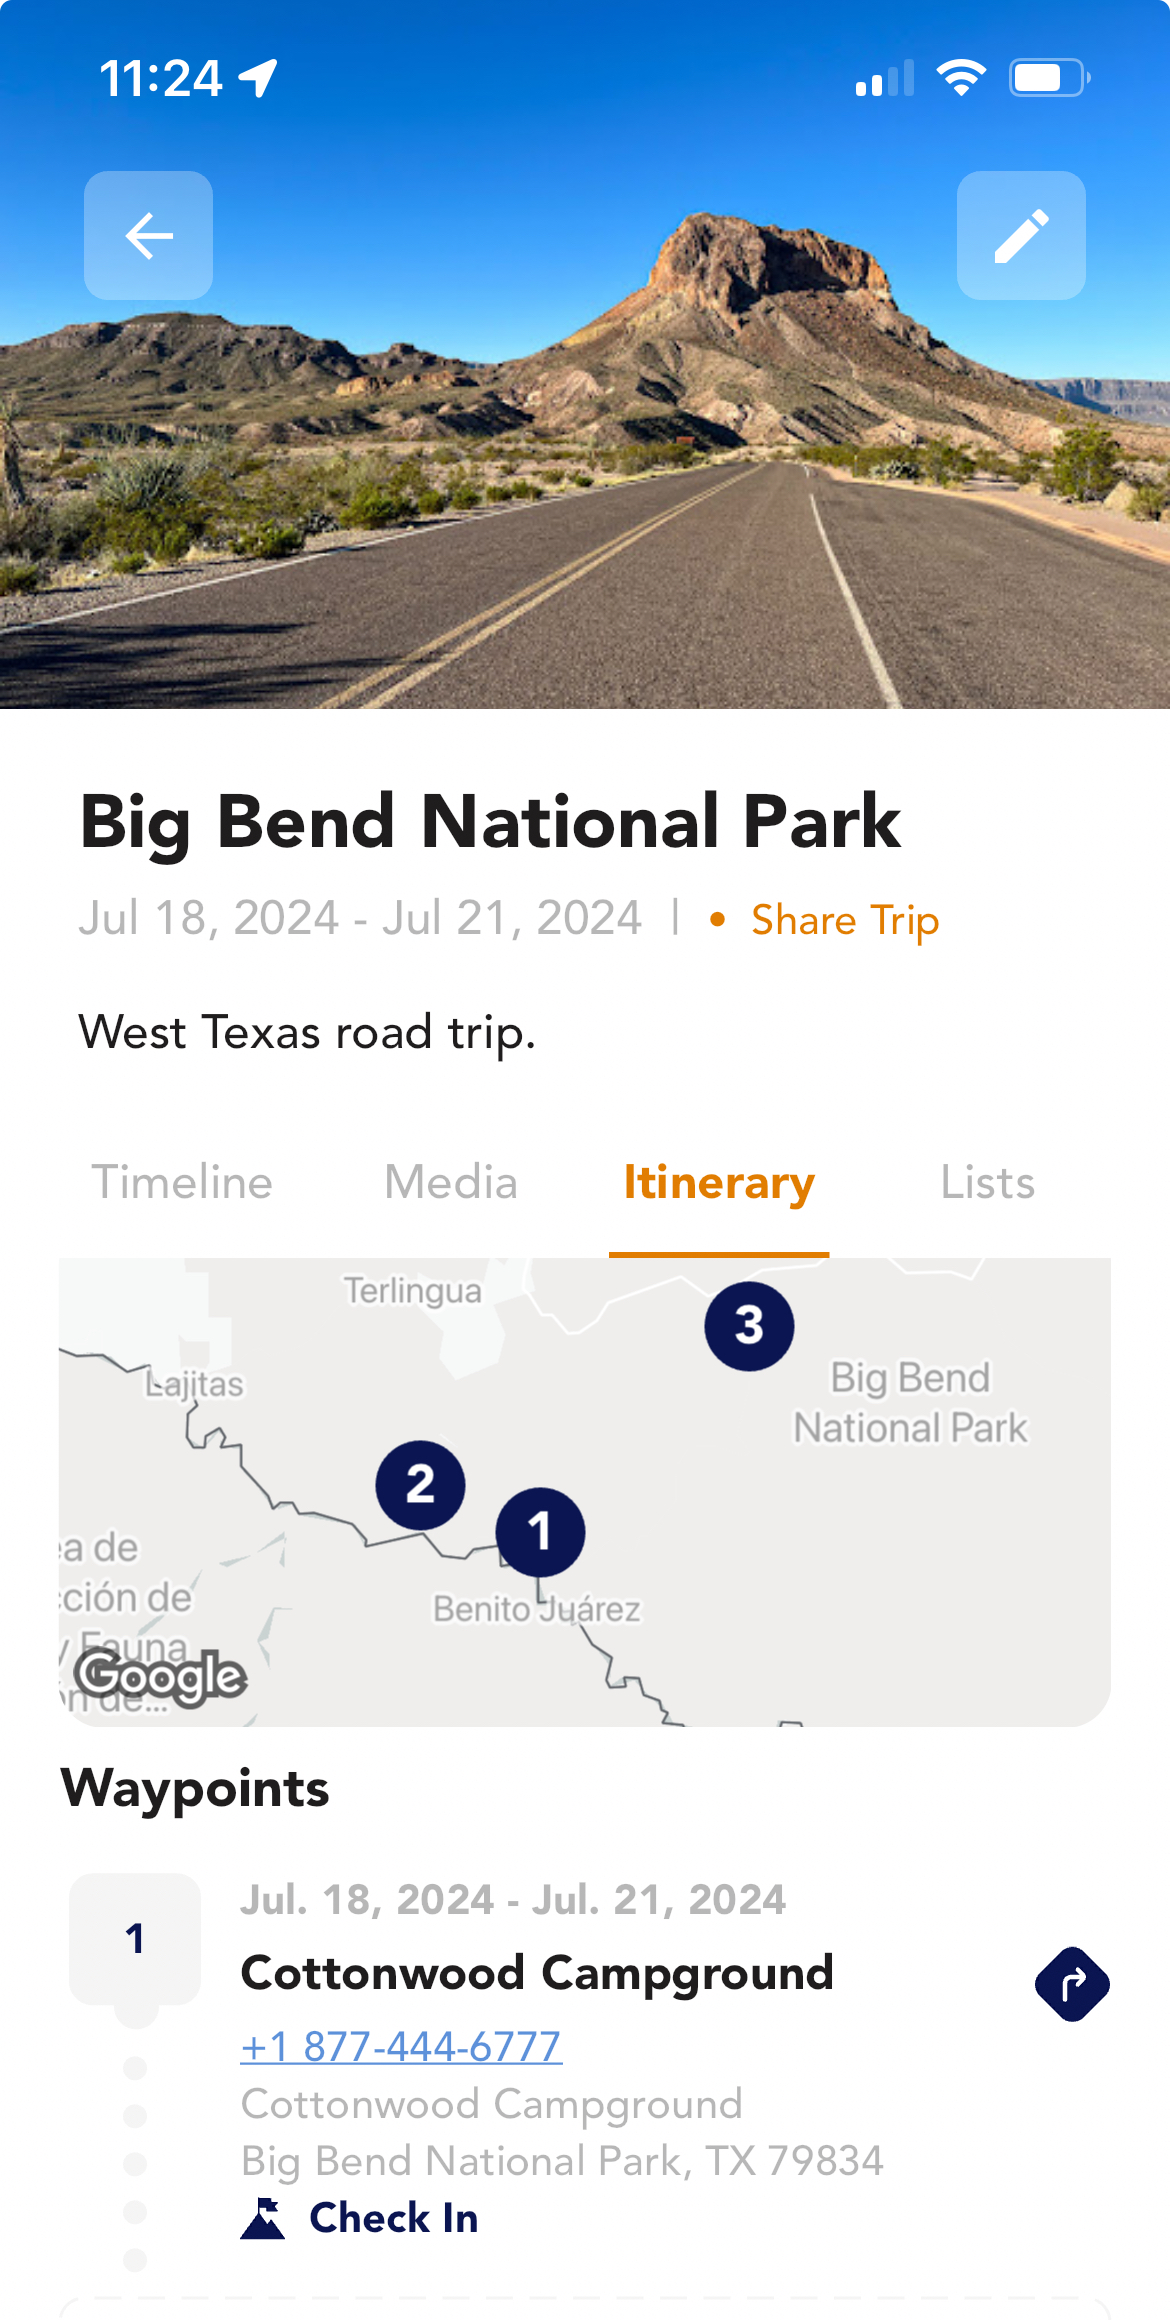 Screenshot of the itinerary section of a trip to Big Bend National Park in the Camping.tools iOS app.